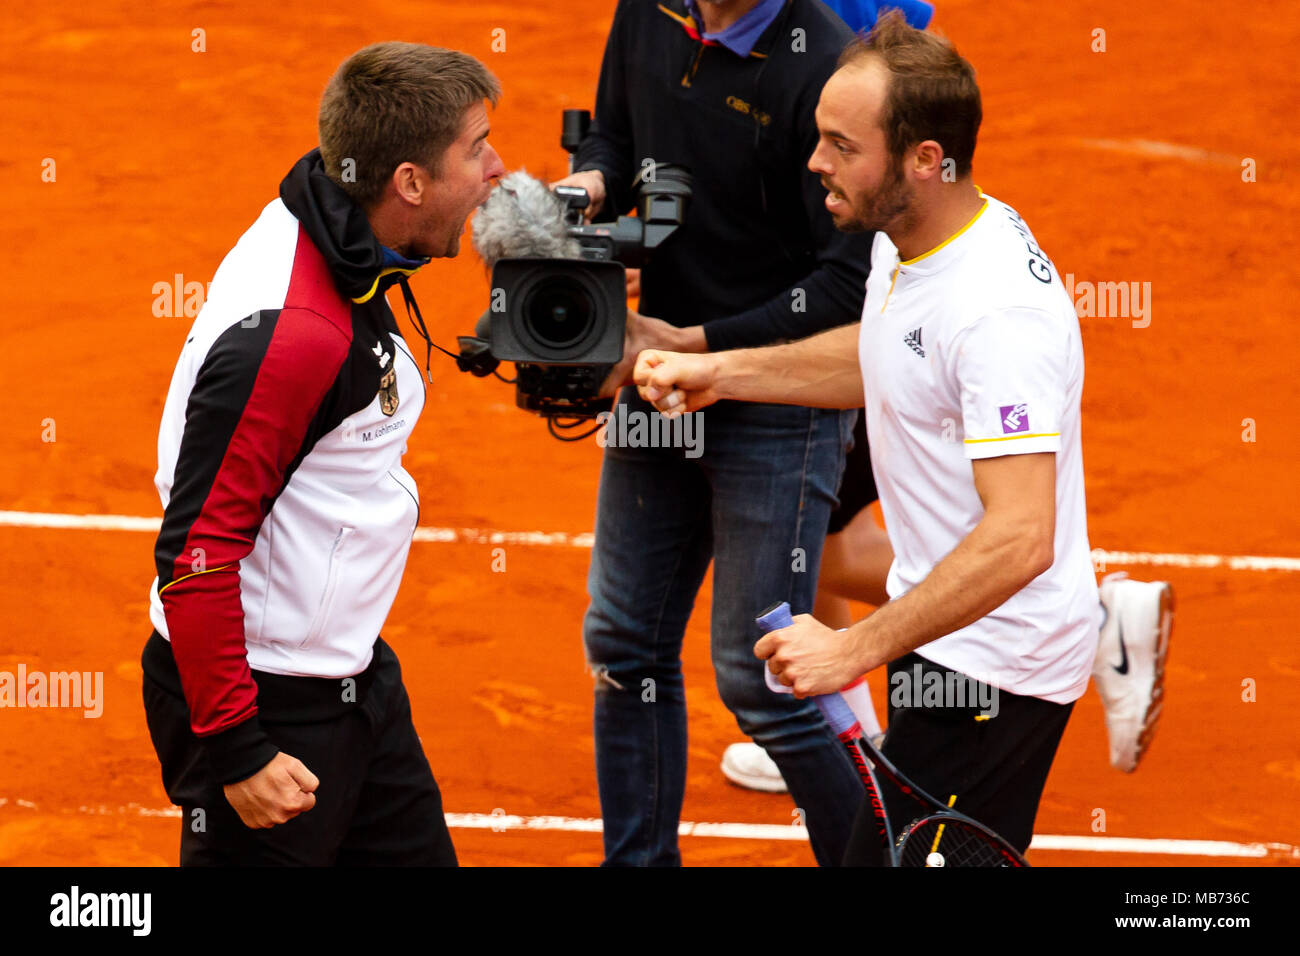 Valencia, Spain. 7th April, 2018. German tennis player Tim Puetz cheer with team captain Michael Kohlmann thanks to a 5-set doubles victory against Feliciano Lopez and Marc Lopez at the Valencia Bullring. Credit: Frank Molter/Alamy Live News Stock Photo